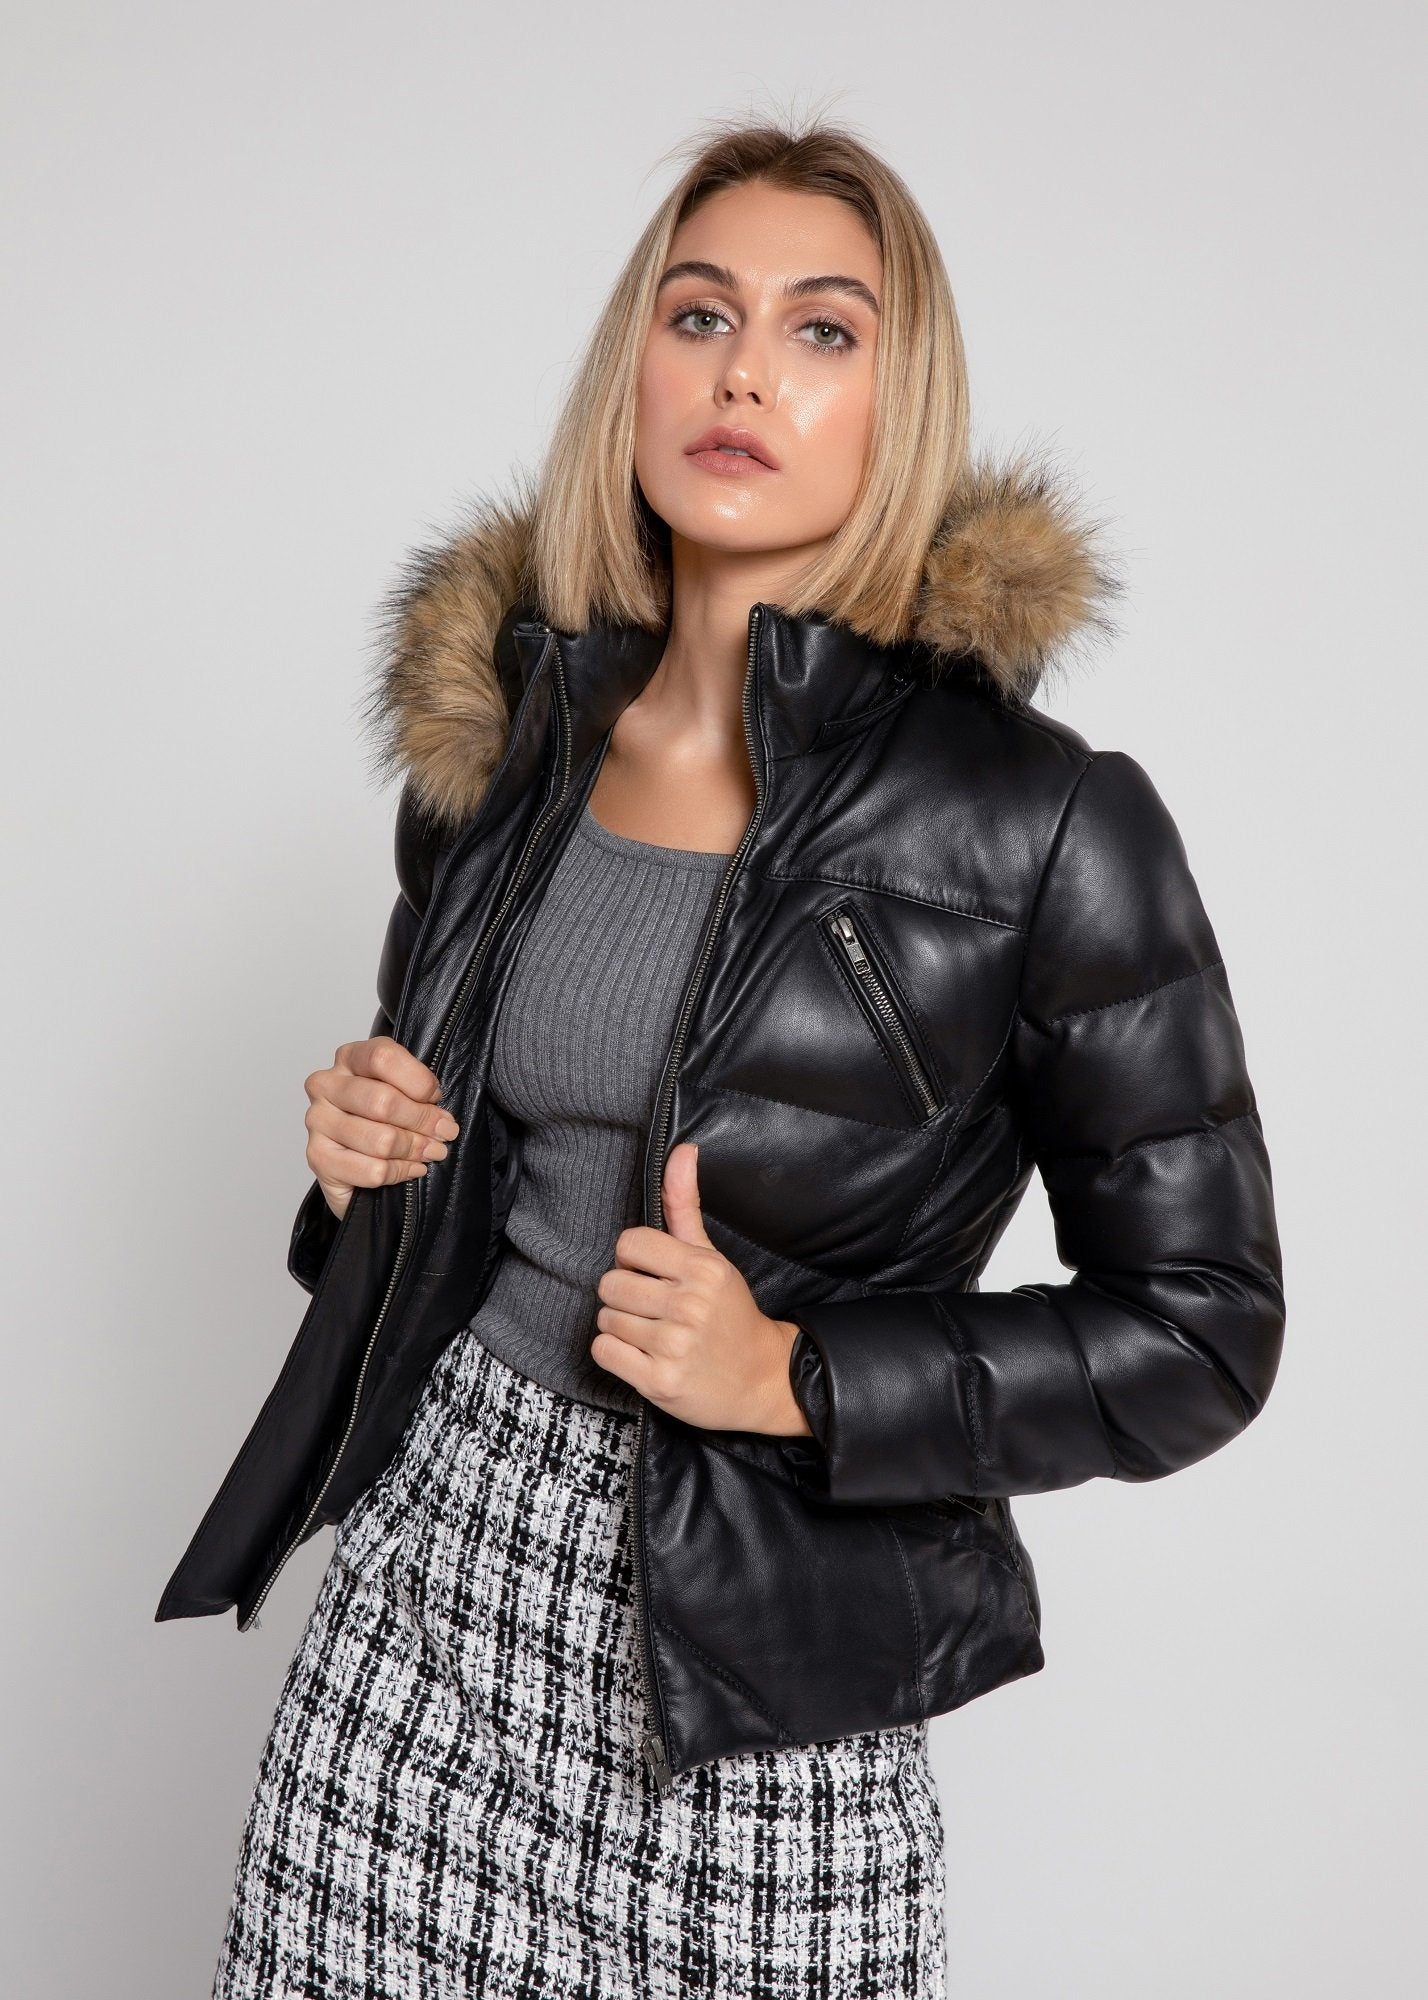 Edgy Leather Jacket Outfits for Women to Prove Your Fashion Sense - Leather  Skin Shop